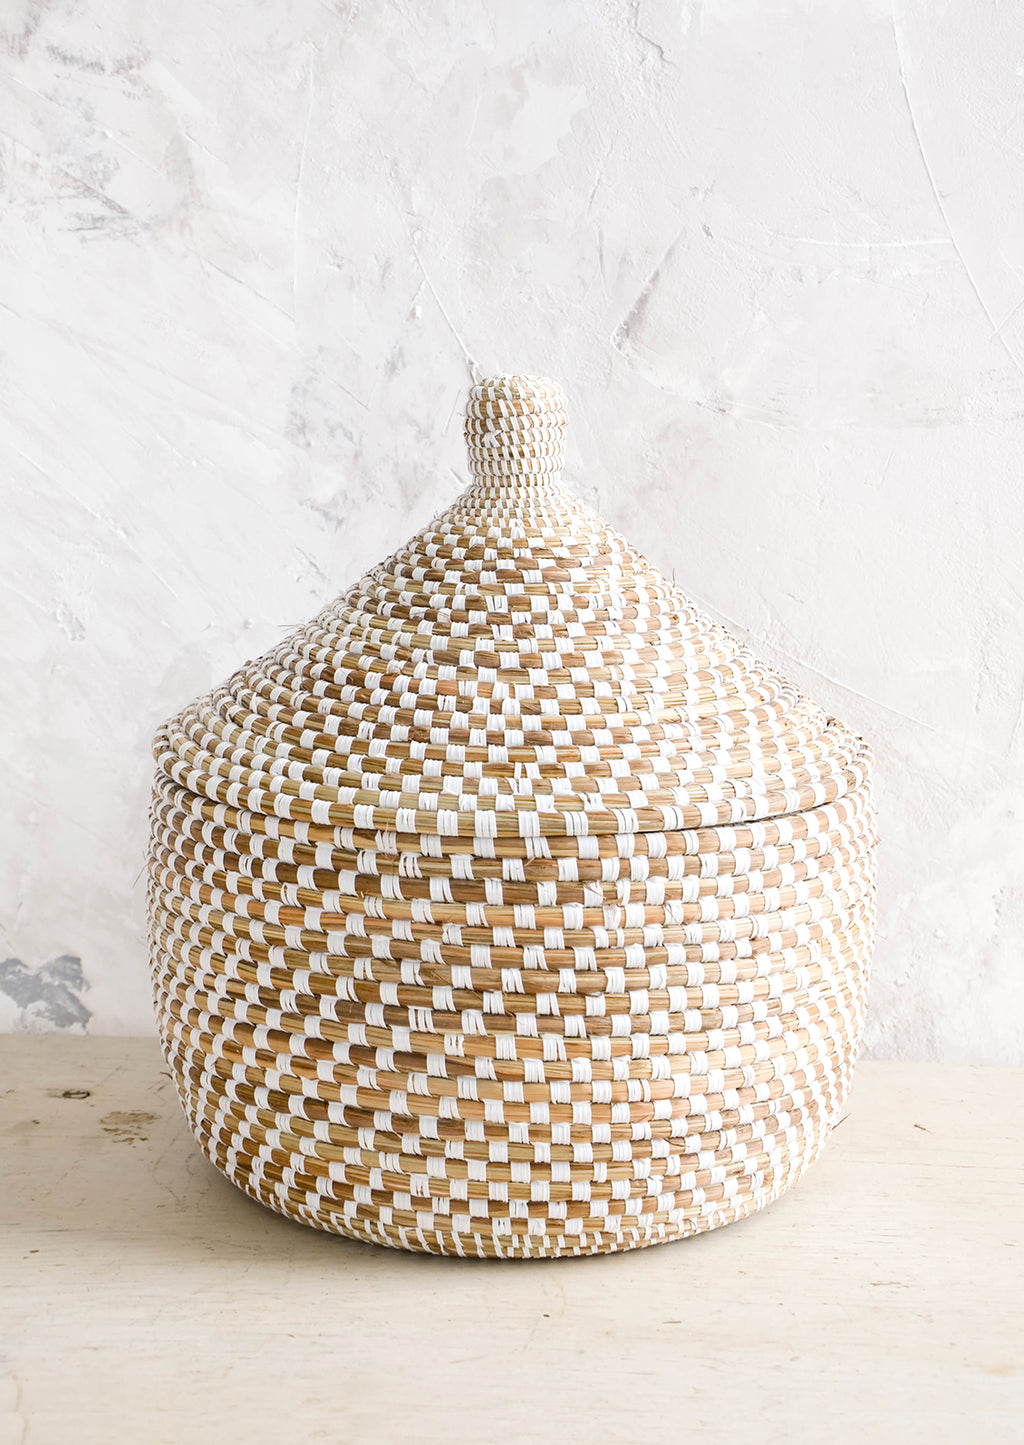 2: Lidded storage basket made from natural grass with white checkered pattern